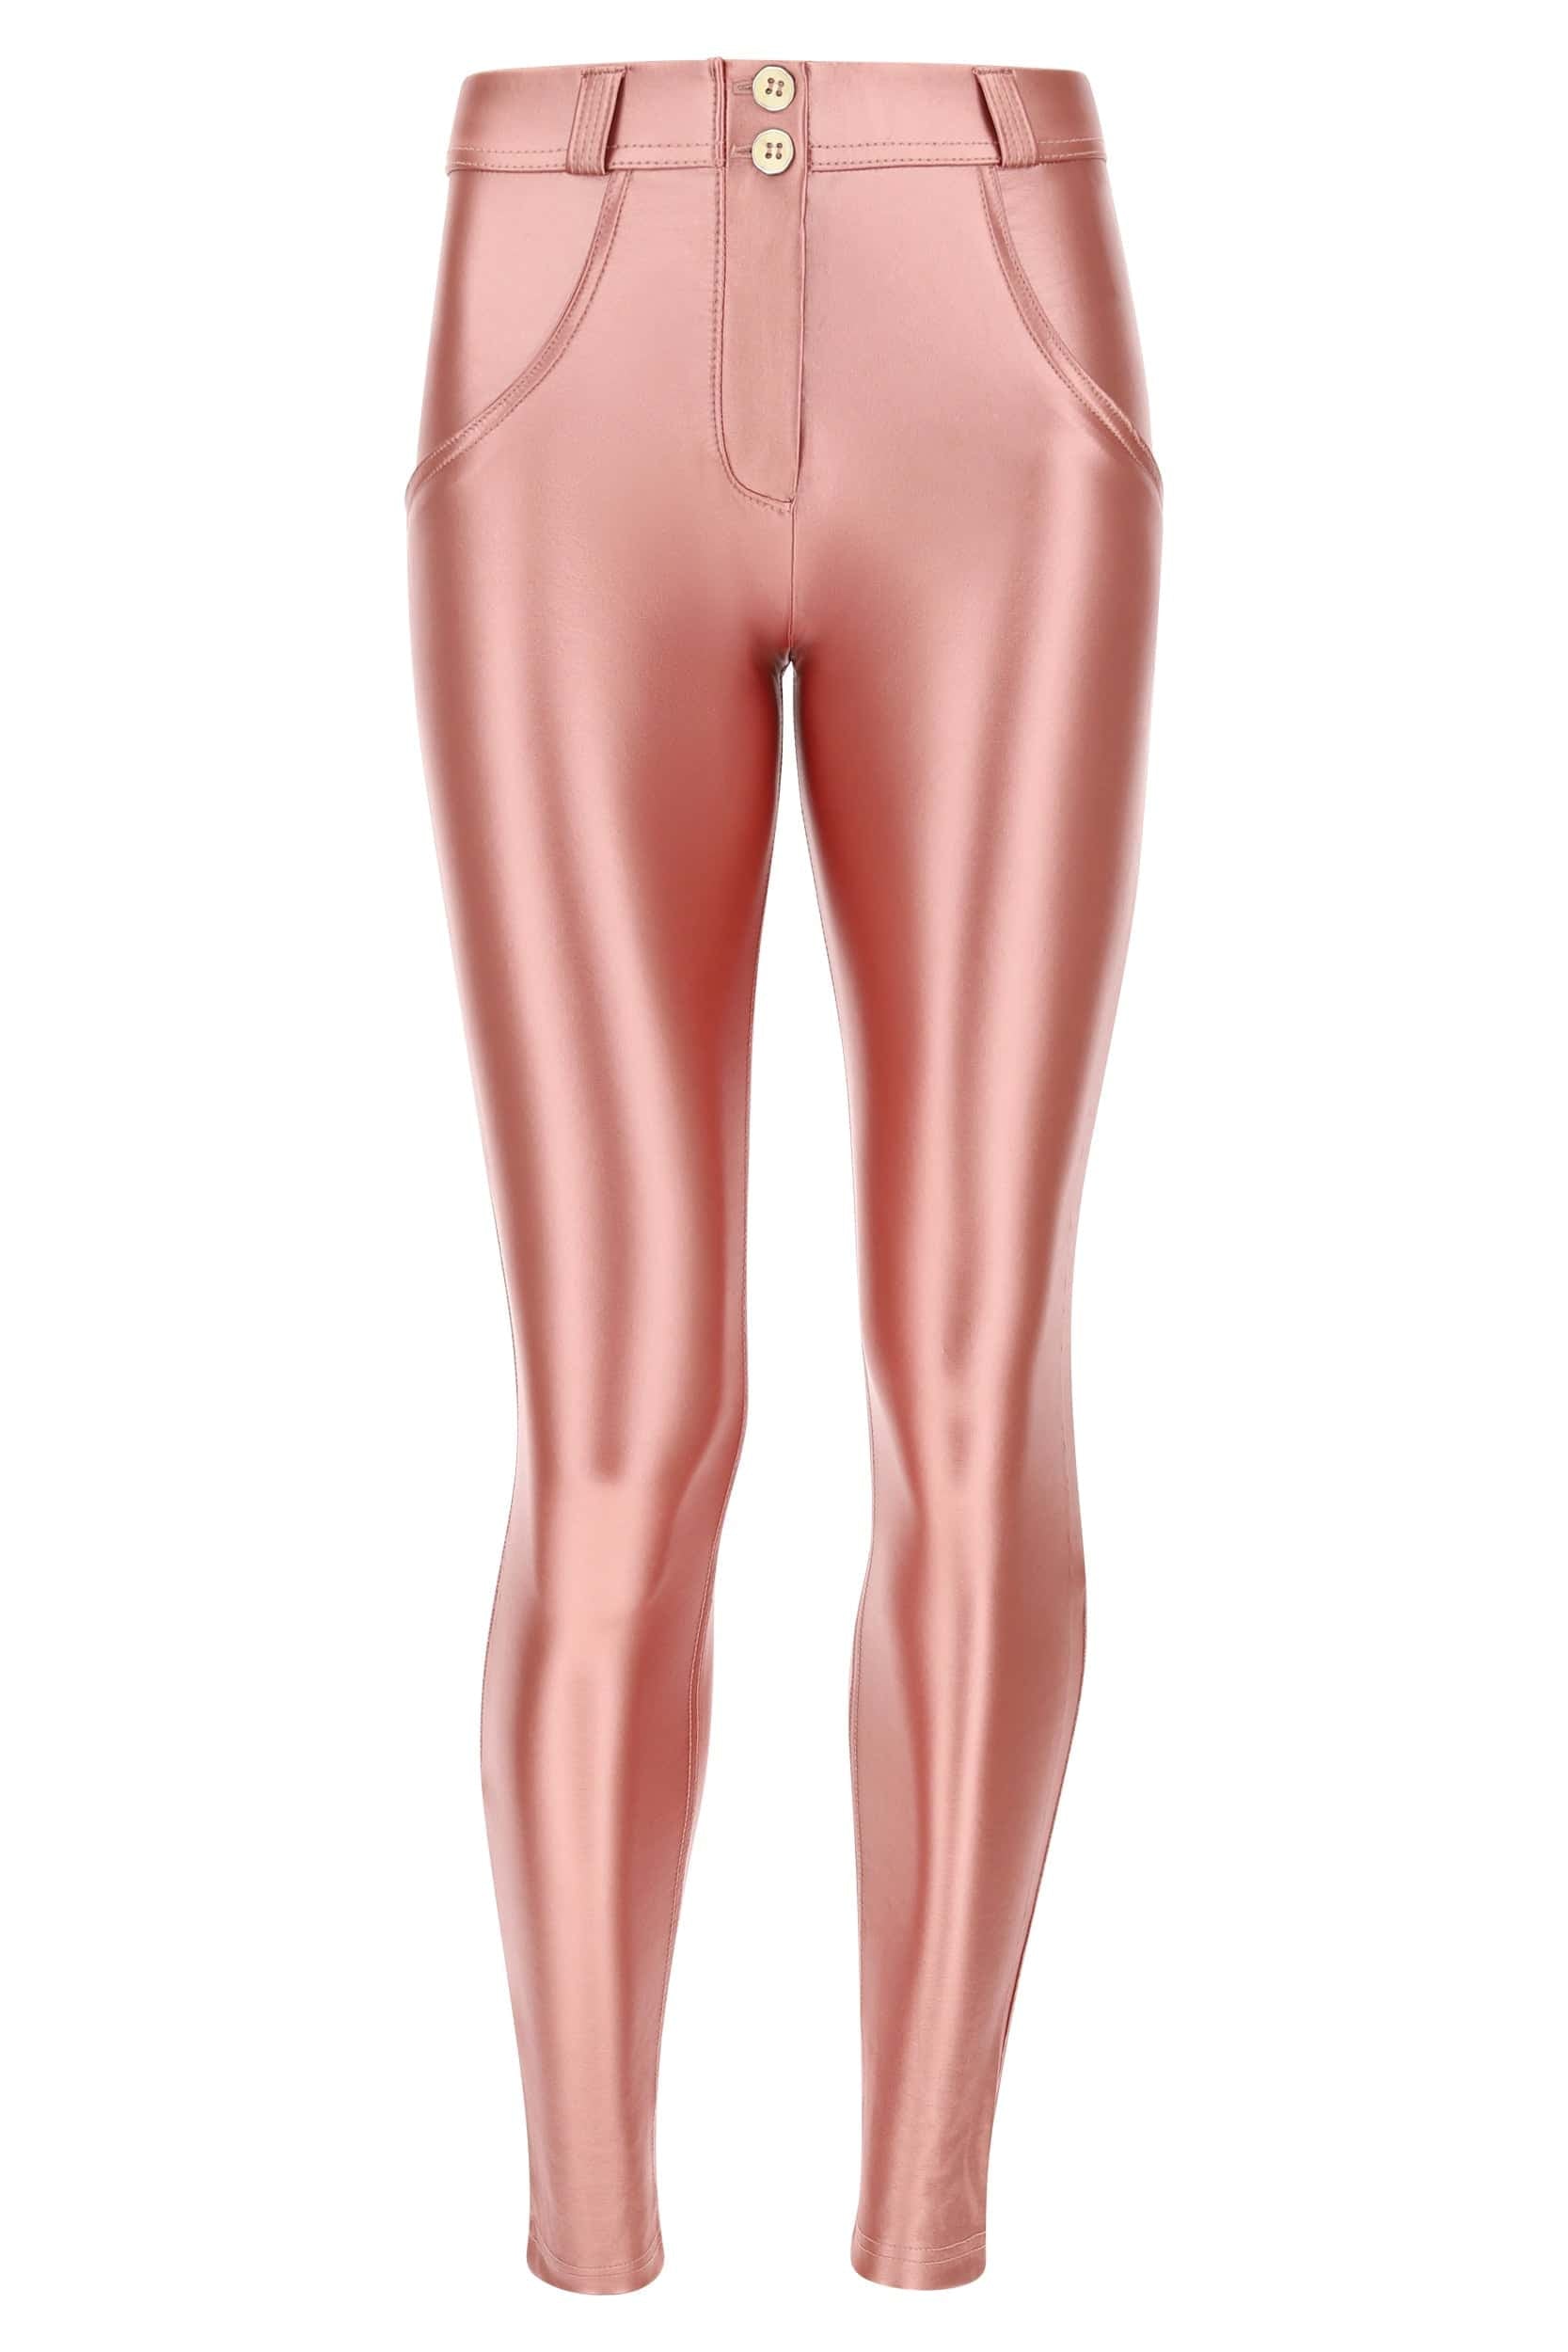 WR.UP® Metallic Faux Leather - Mid Rise - Full Length - Pink 4